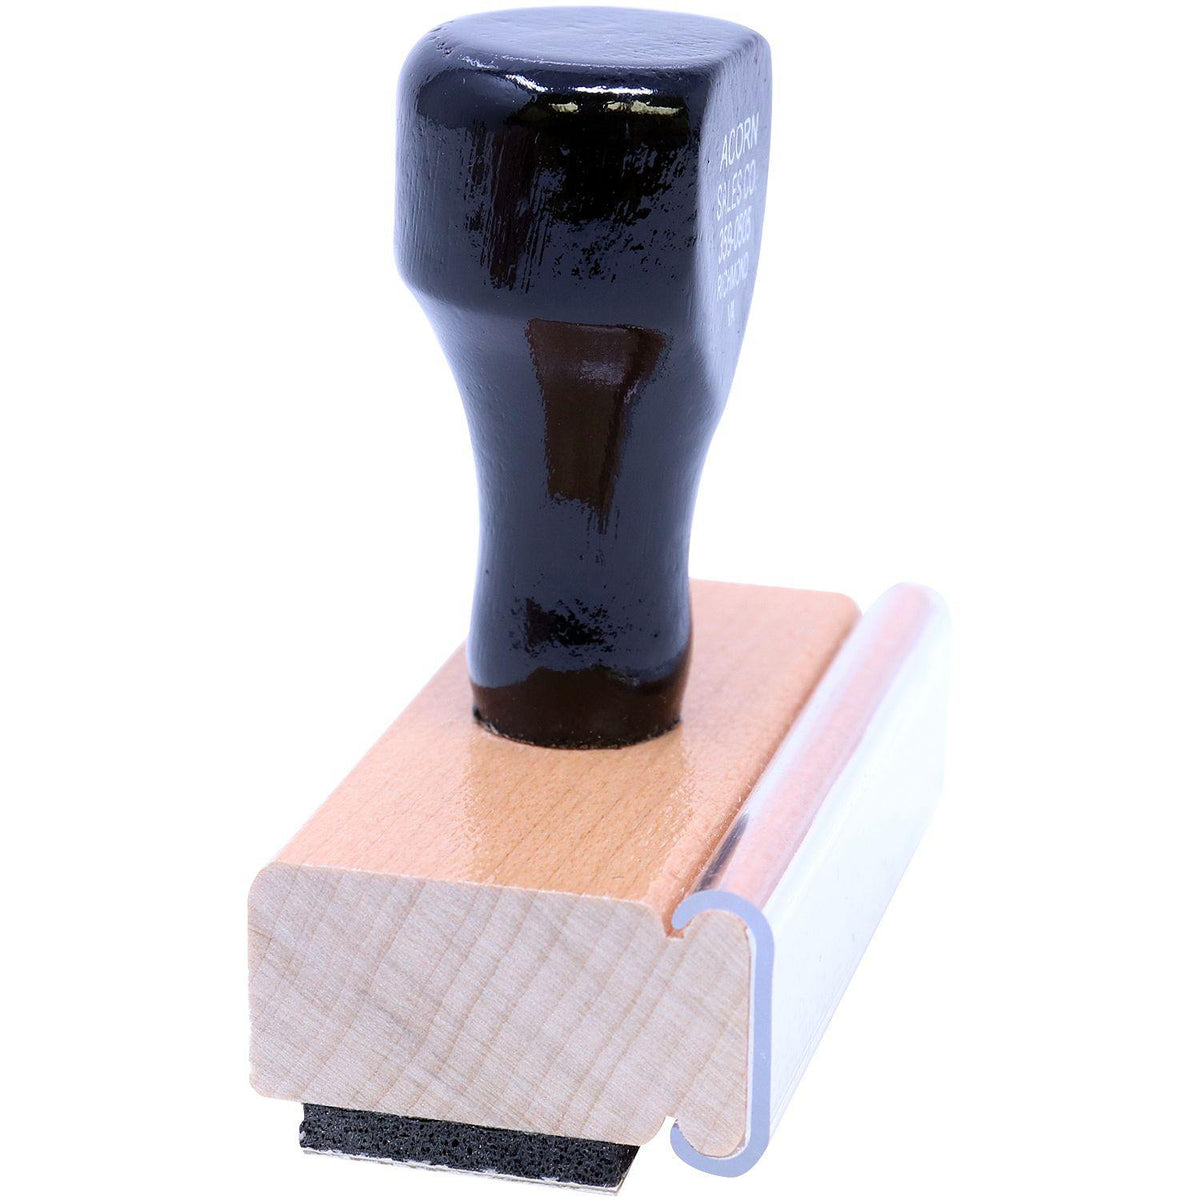 Please See Me Rubber Stamp - Engineer Seal Stamps - Brand_Acorn, Impression Size_Small, Stamp Type_Regular Stamp, Type of Use_Teacher